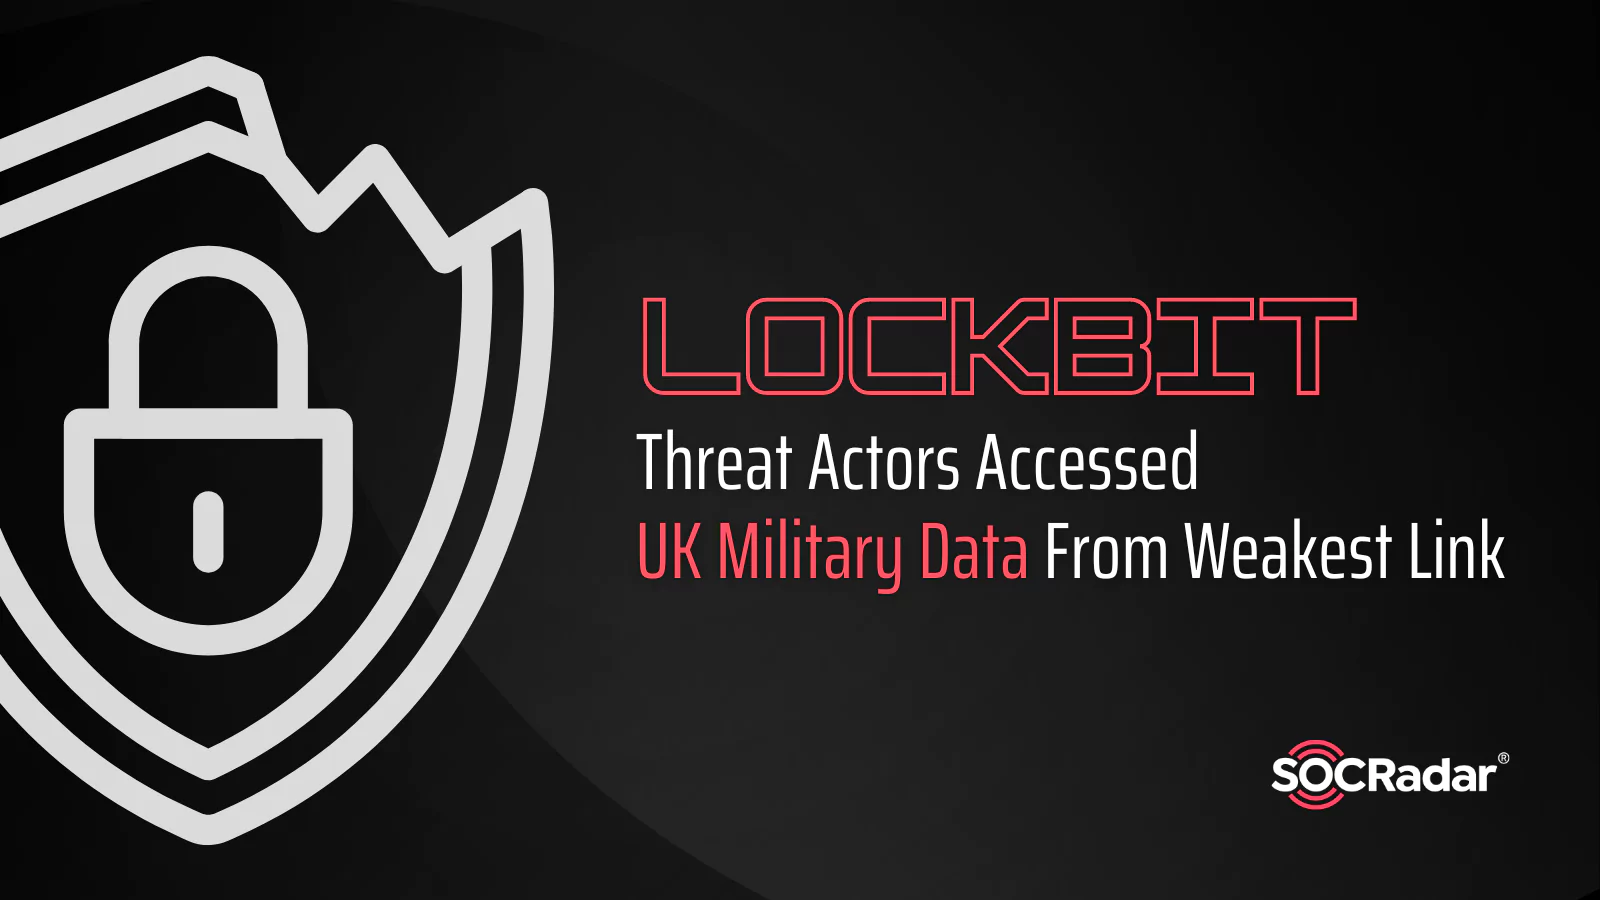 SOCRadar® Cyber Intelligence Inc. | Threat Actors Accessed UK Military Data From Weakest Link